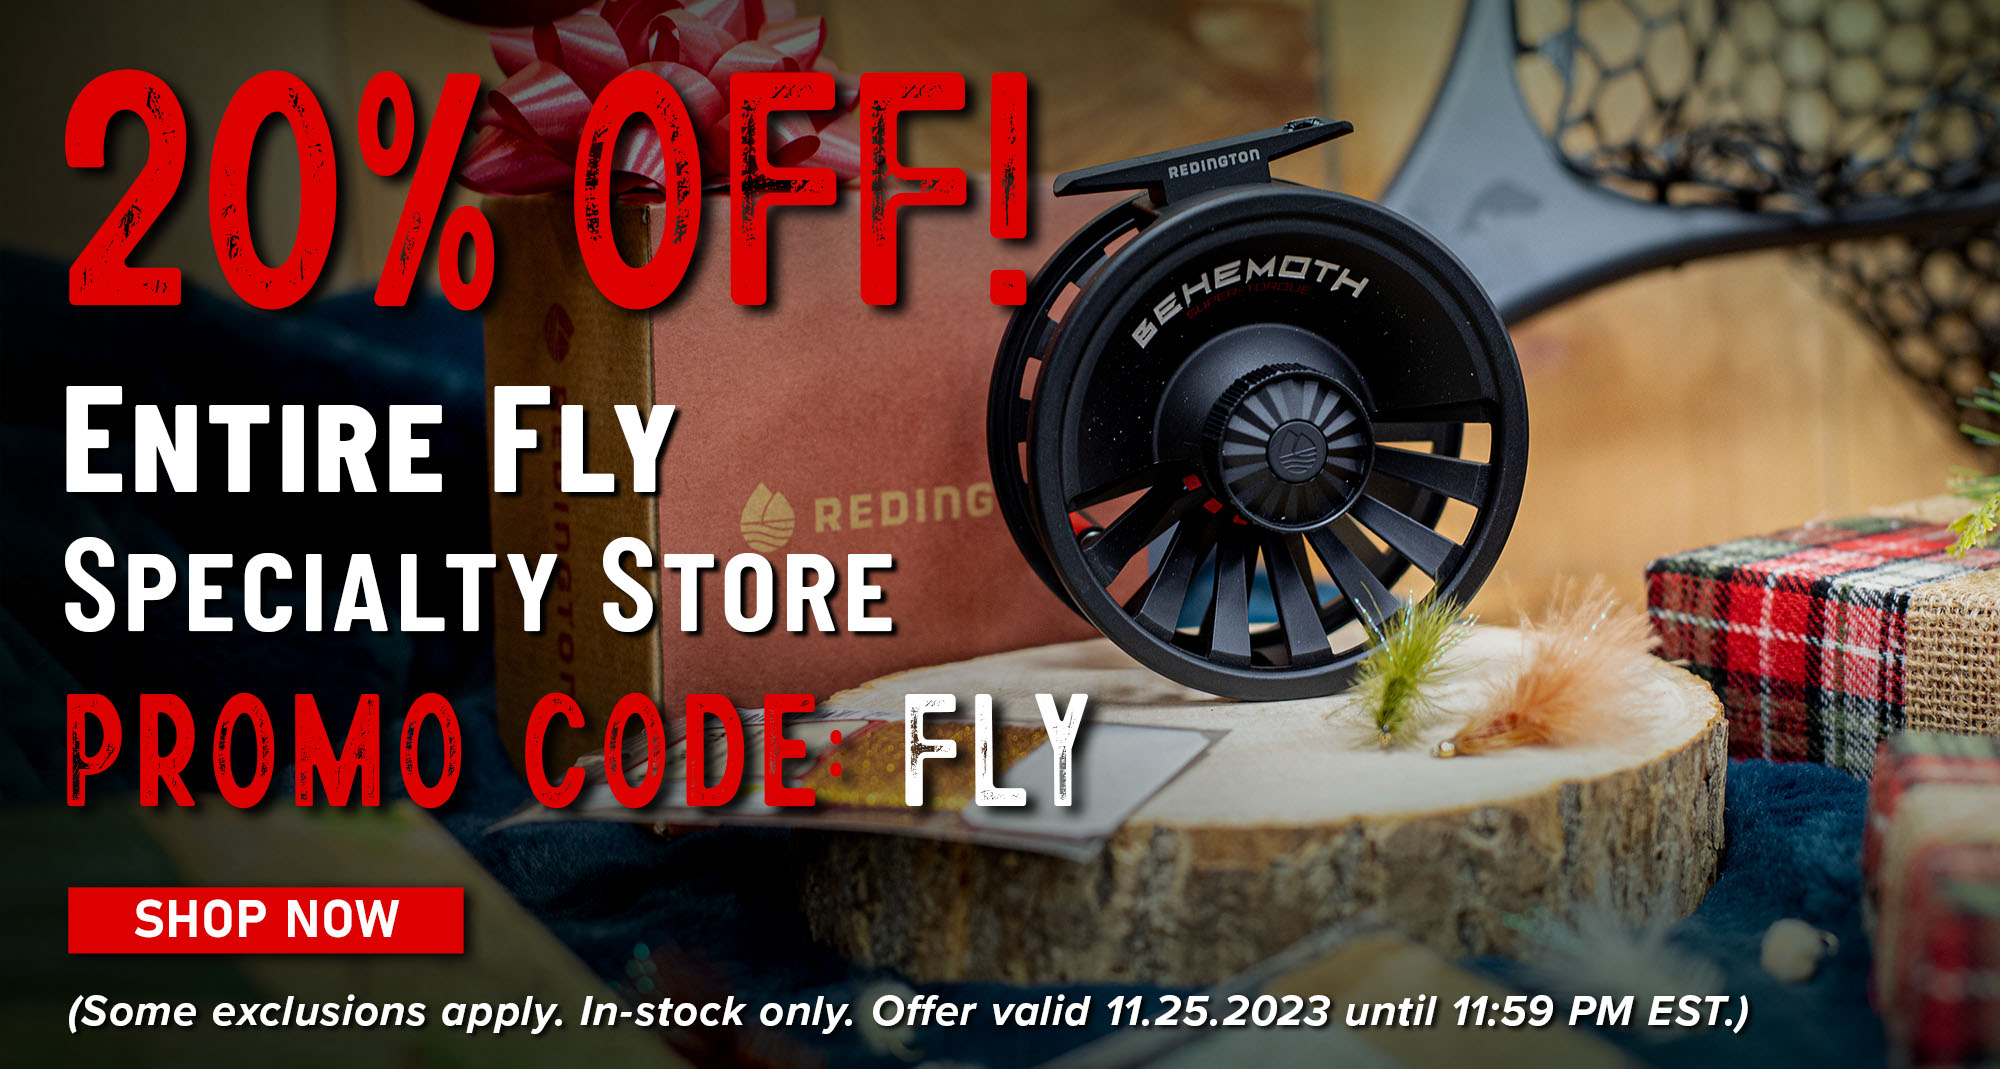 20% Off! Entire Fly Specialty Store Promo Code: FLY Shop Now (Some exclusions apply. In-stock only. Offer valid 11.25.2023 until 11:59 PM EST.)